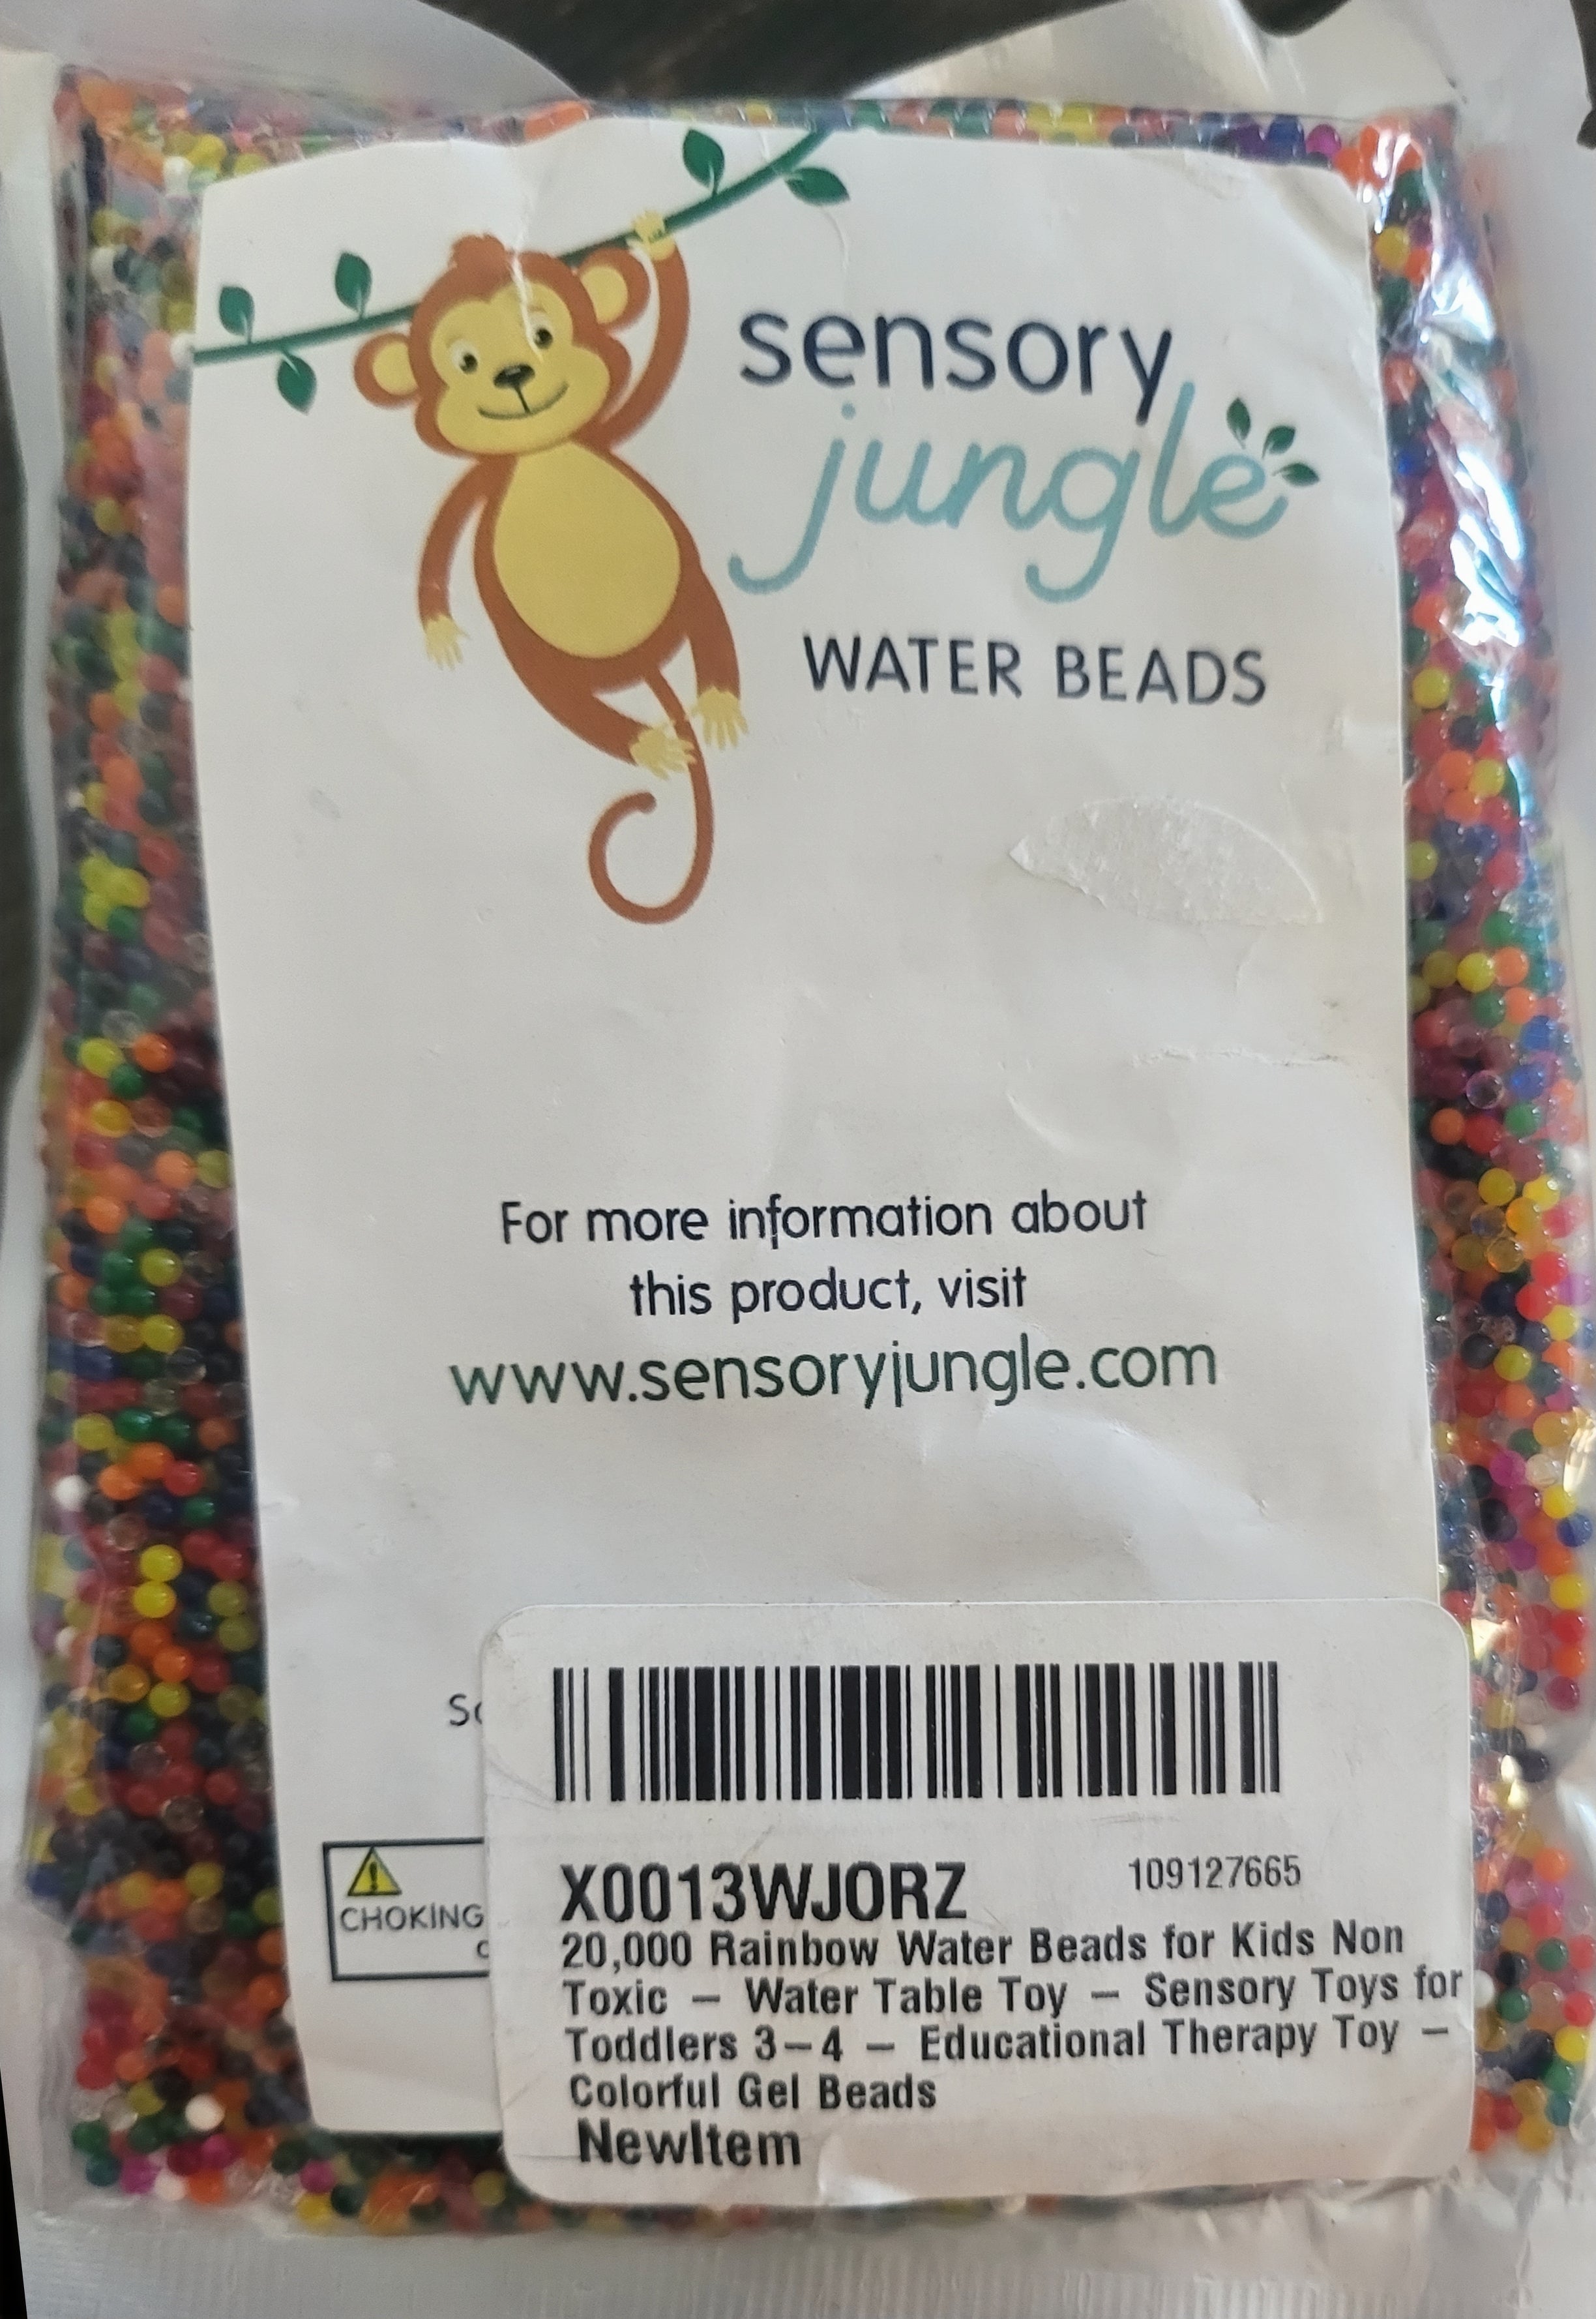 Sensory Jungle 20,000 rainbow water beads for kids non toxic - water table  toy - sensory toys for toddlers 3-4 - educational therapy toy - c